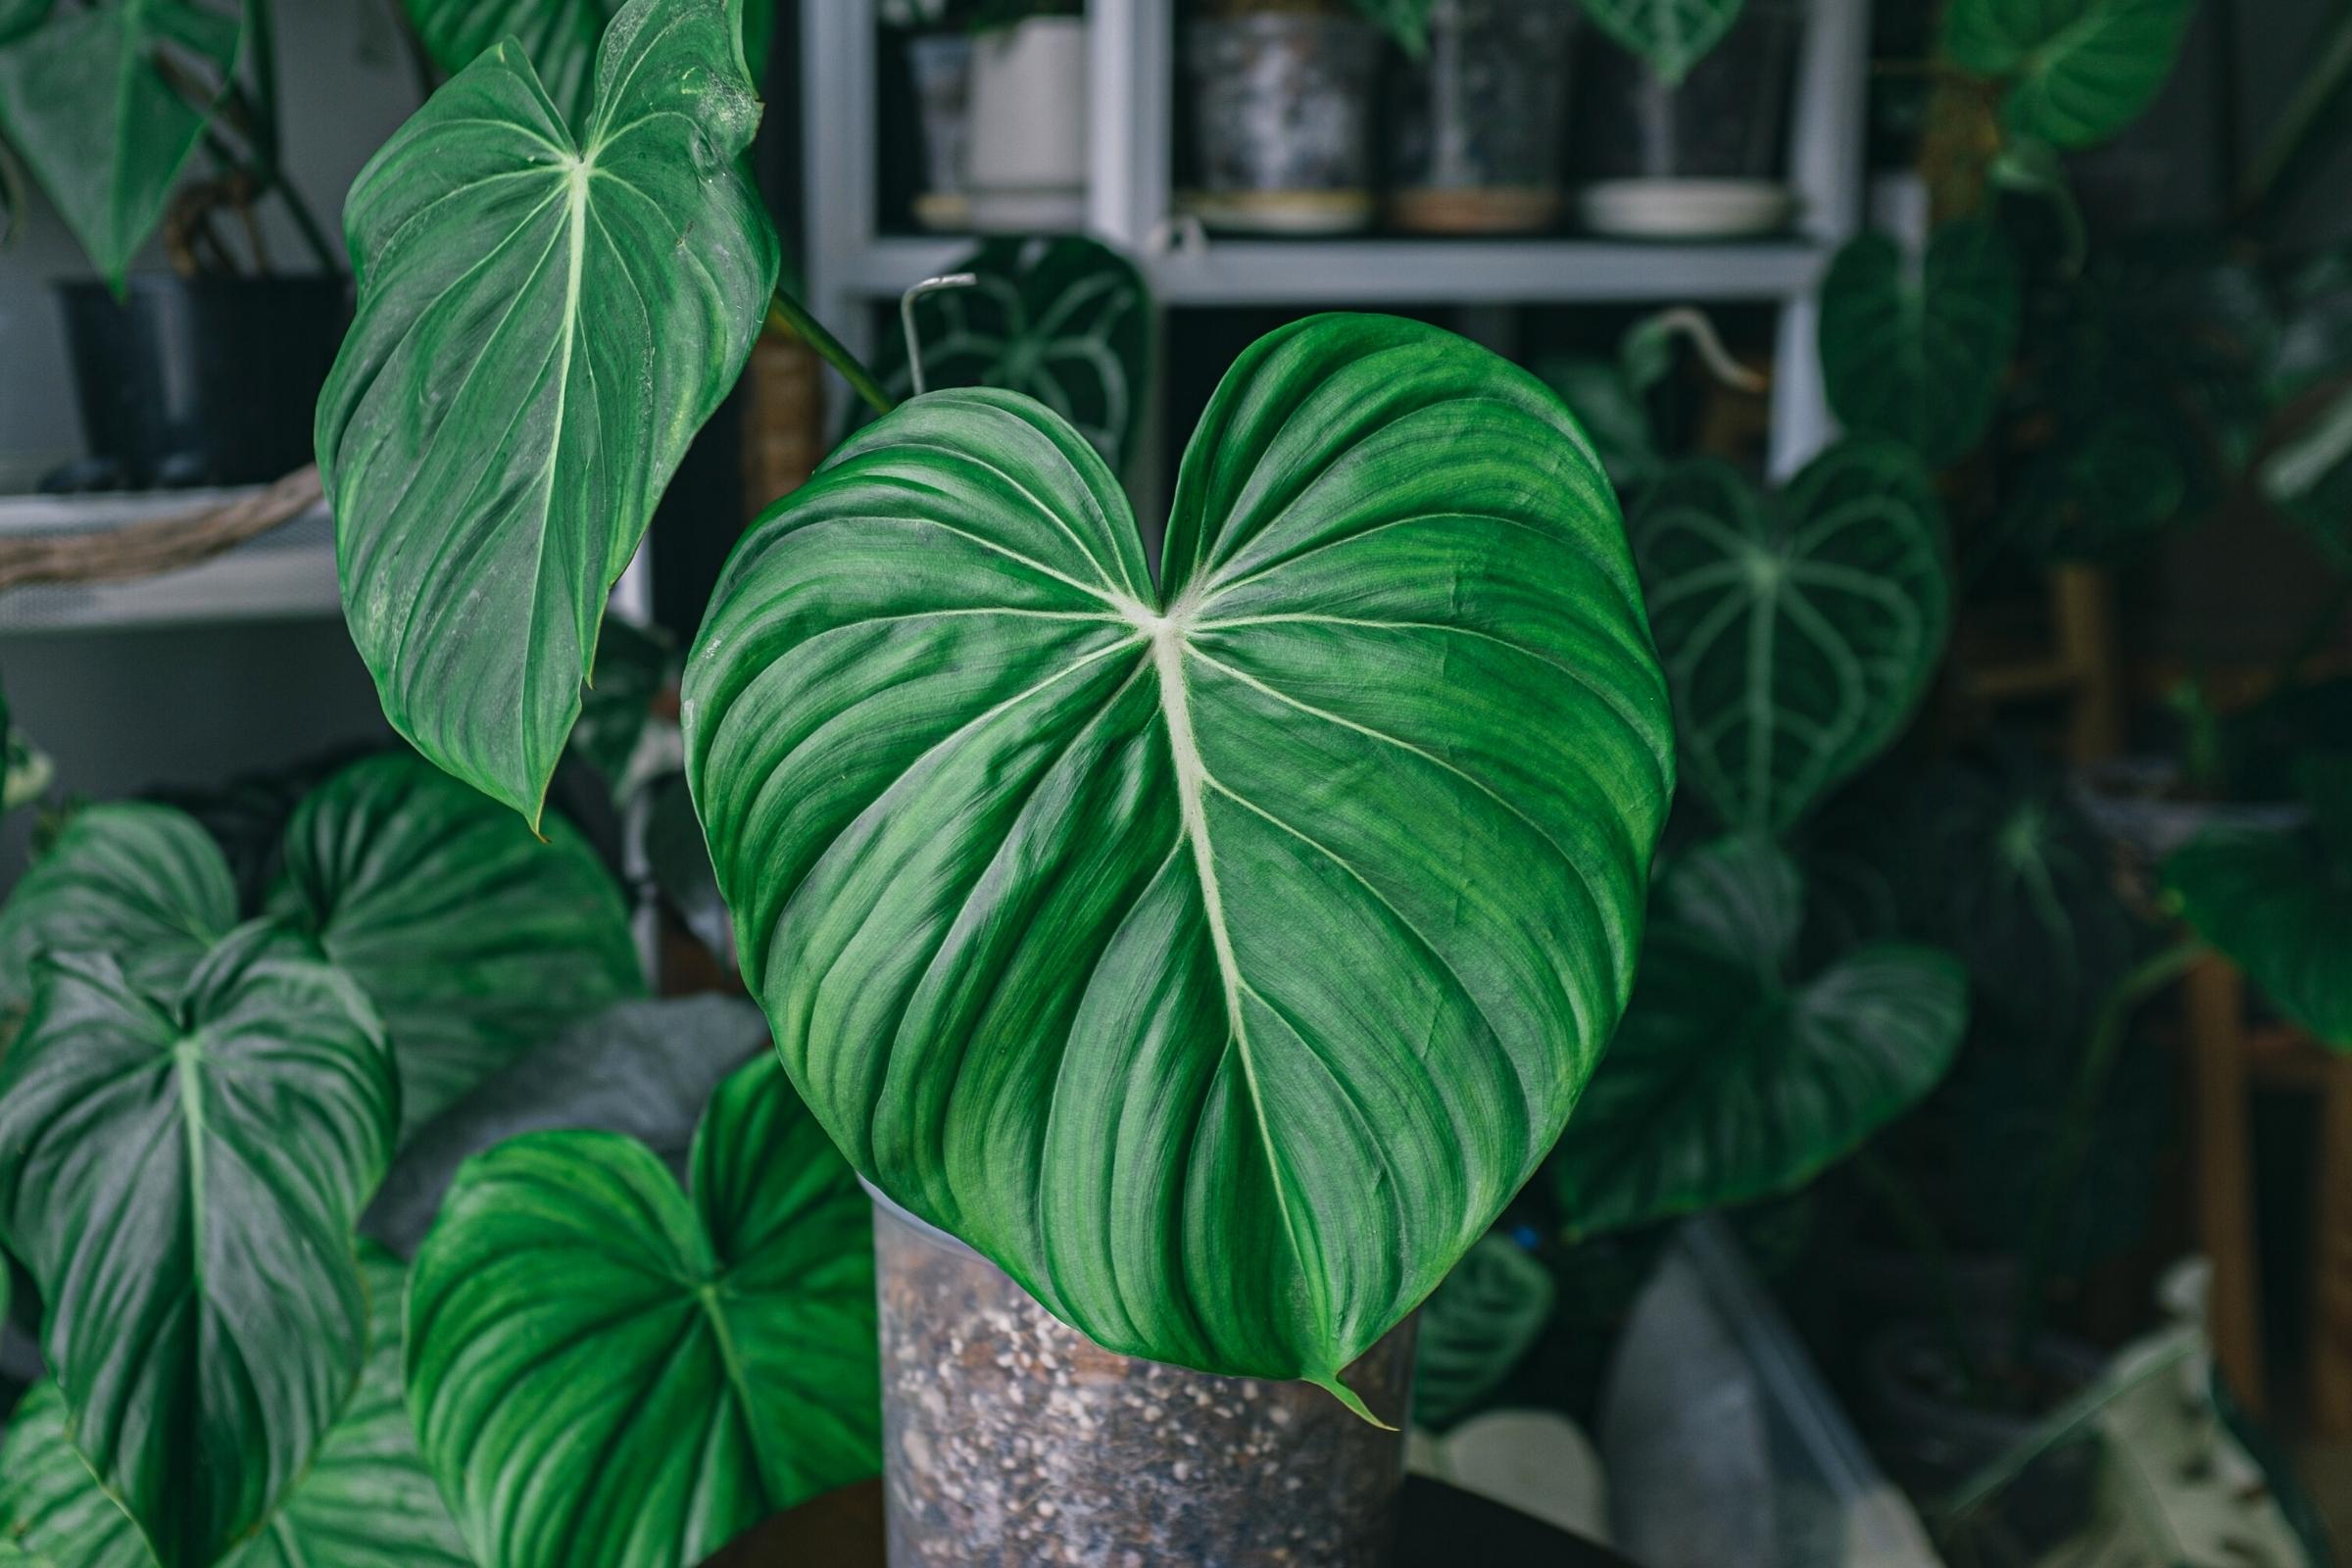 The Philodendron Gloriosum is a True Houseplant Gem Highly Sought-After Tropical Houseplant